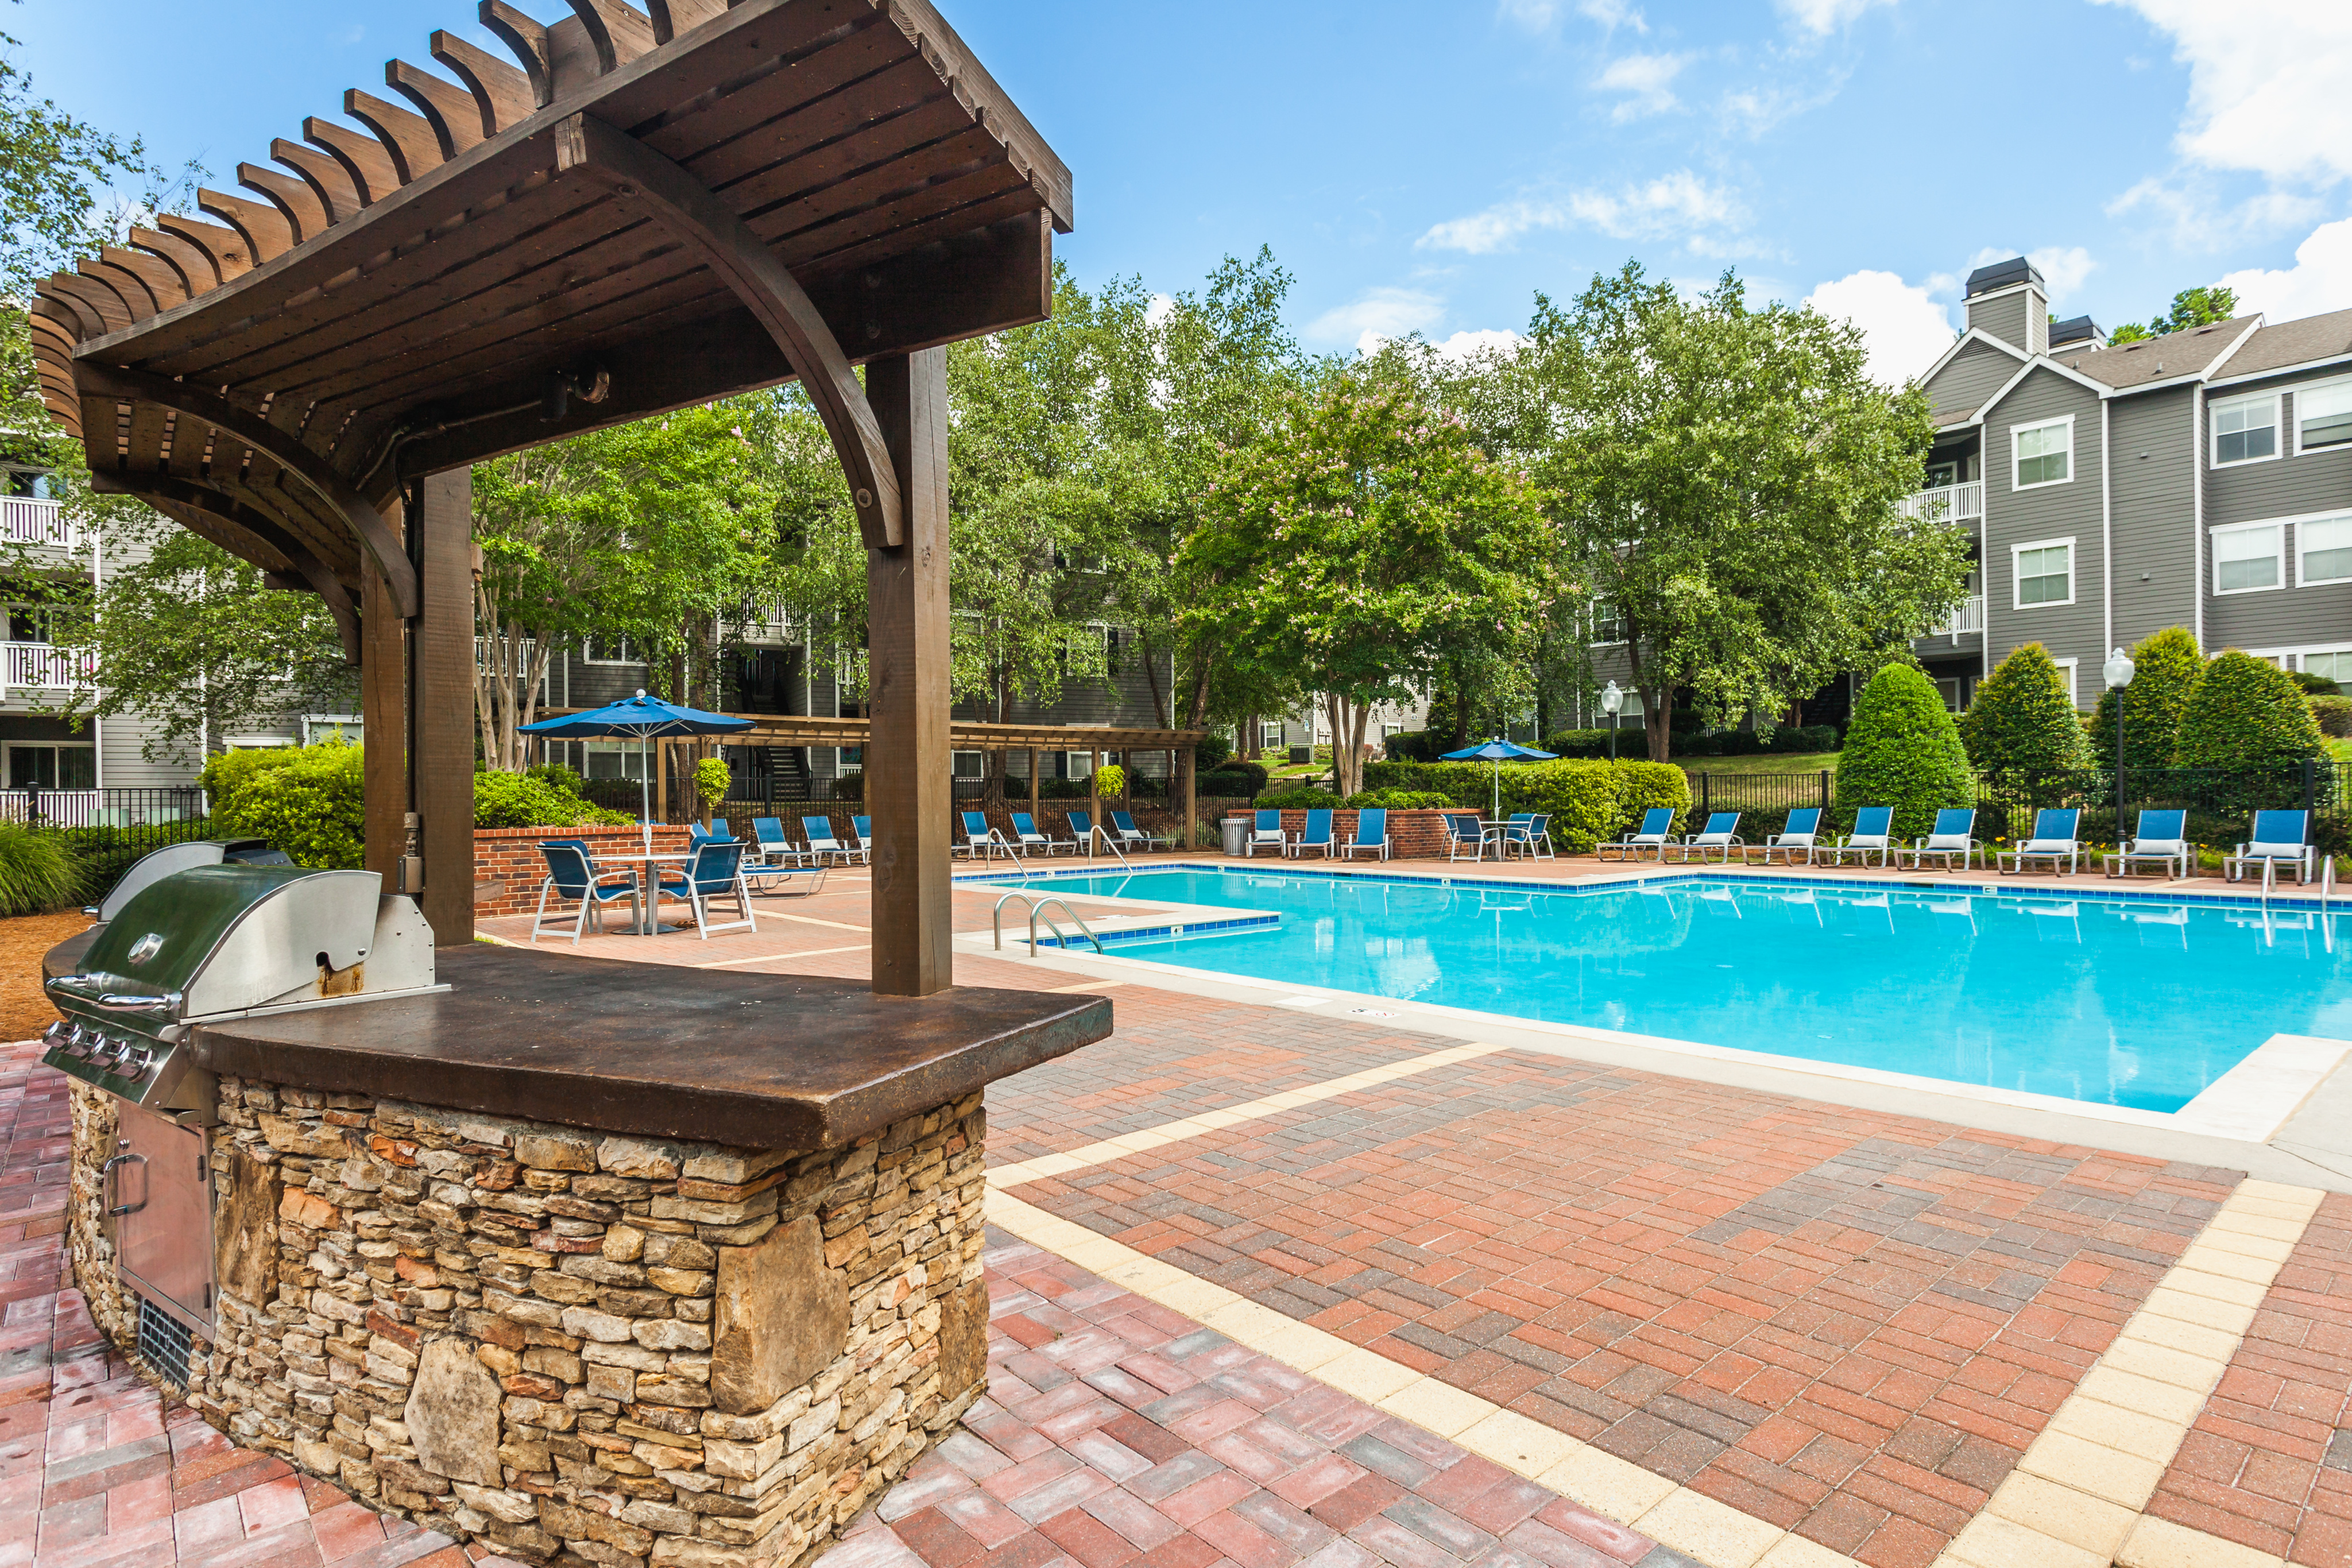 View of Grilling Area, Showing Grill, Pergola, Picnic Areas at Waterford Creek Apartments